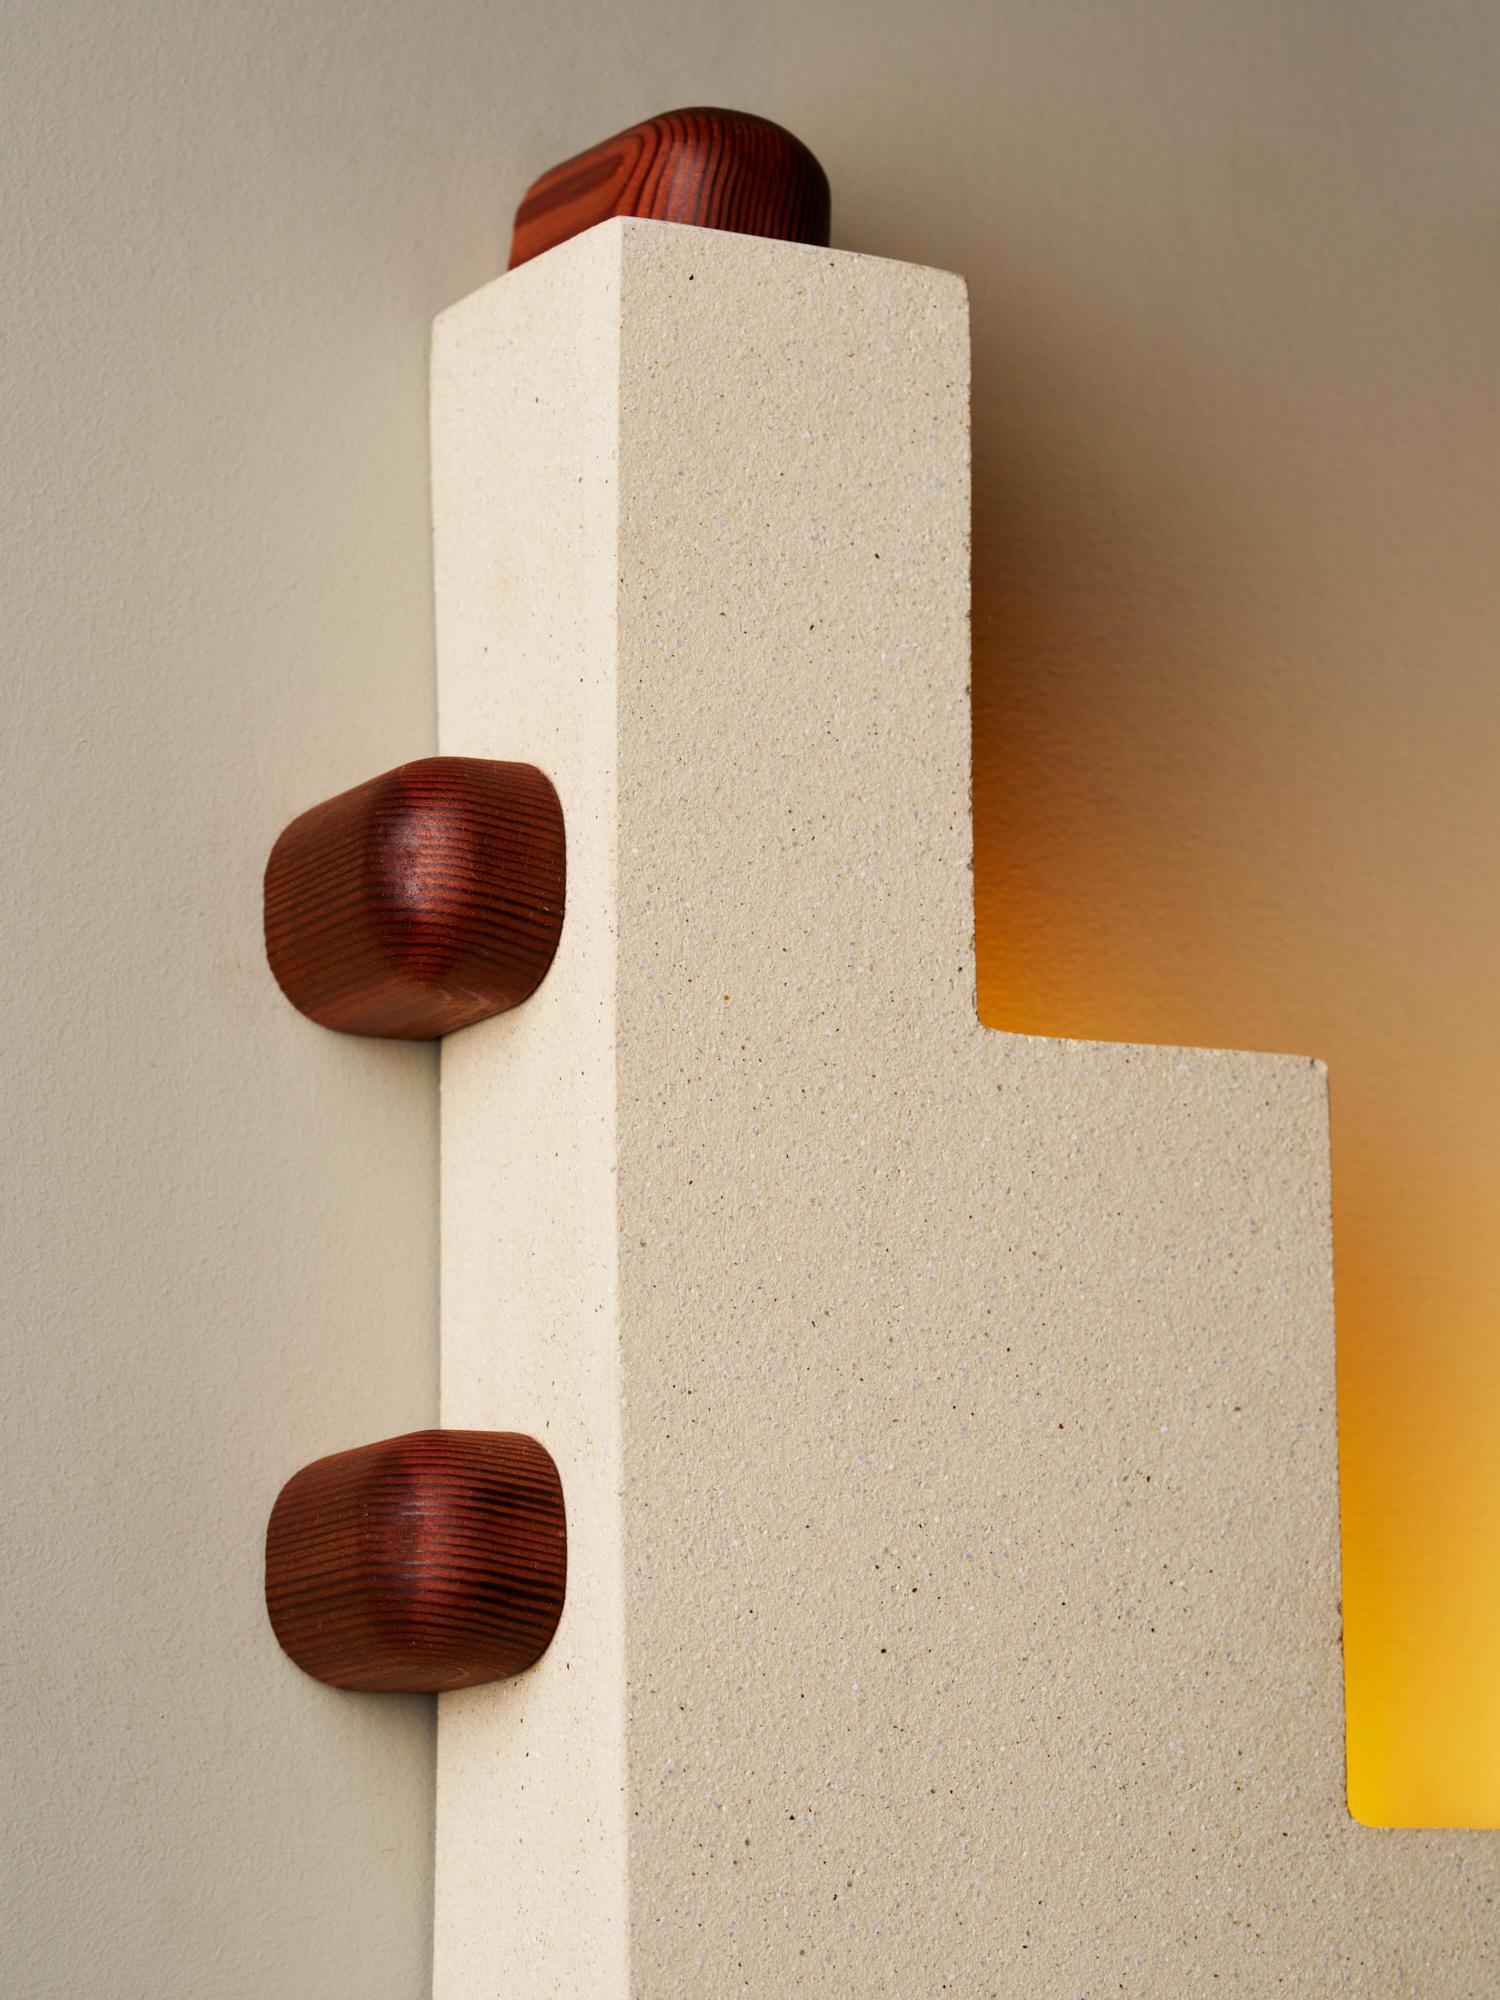 Sierra Sconces in Ceramic, Wood and Brass by Piscina - ST For Sale 1